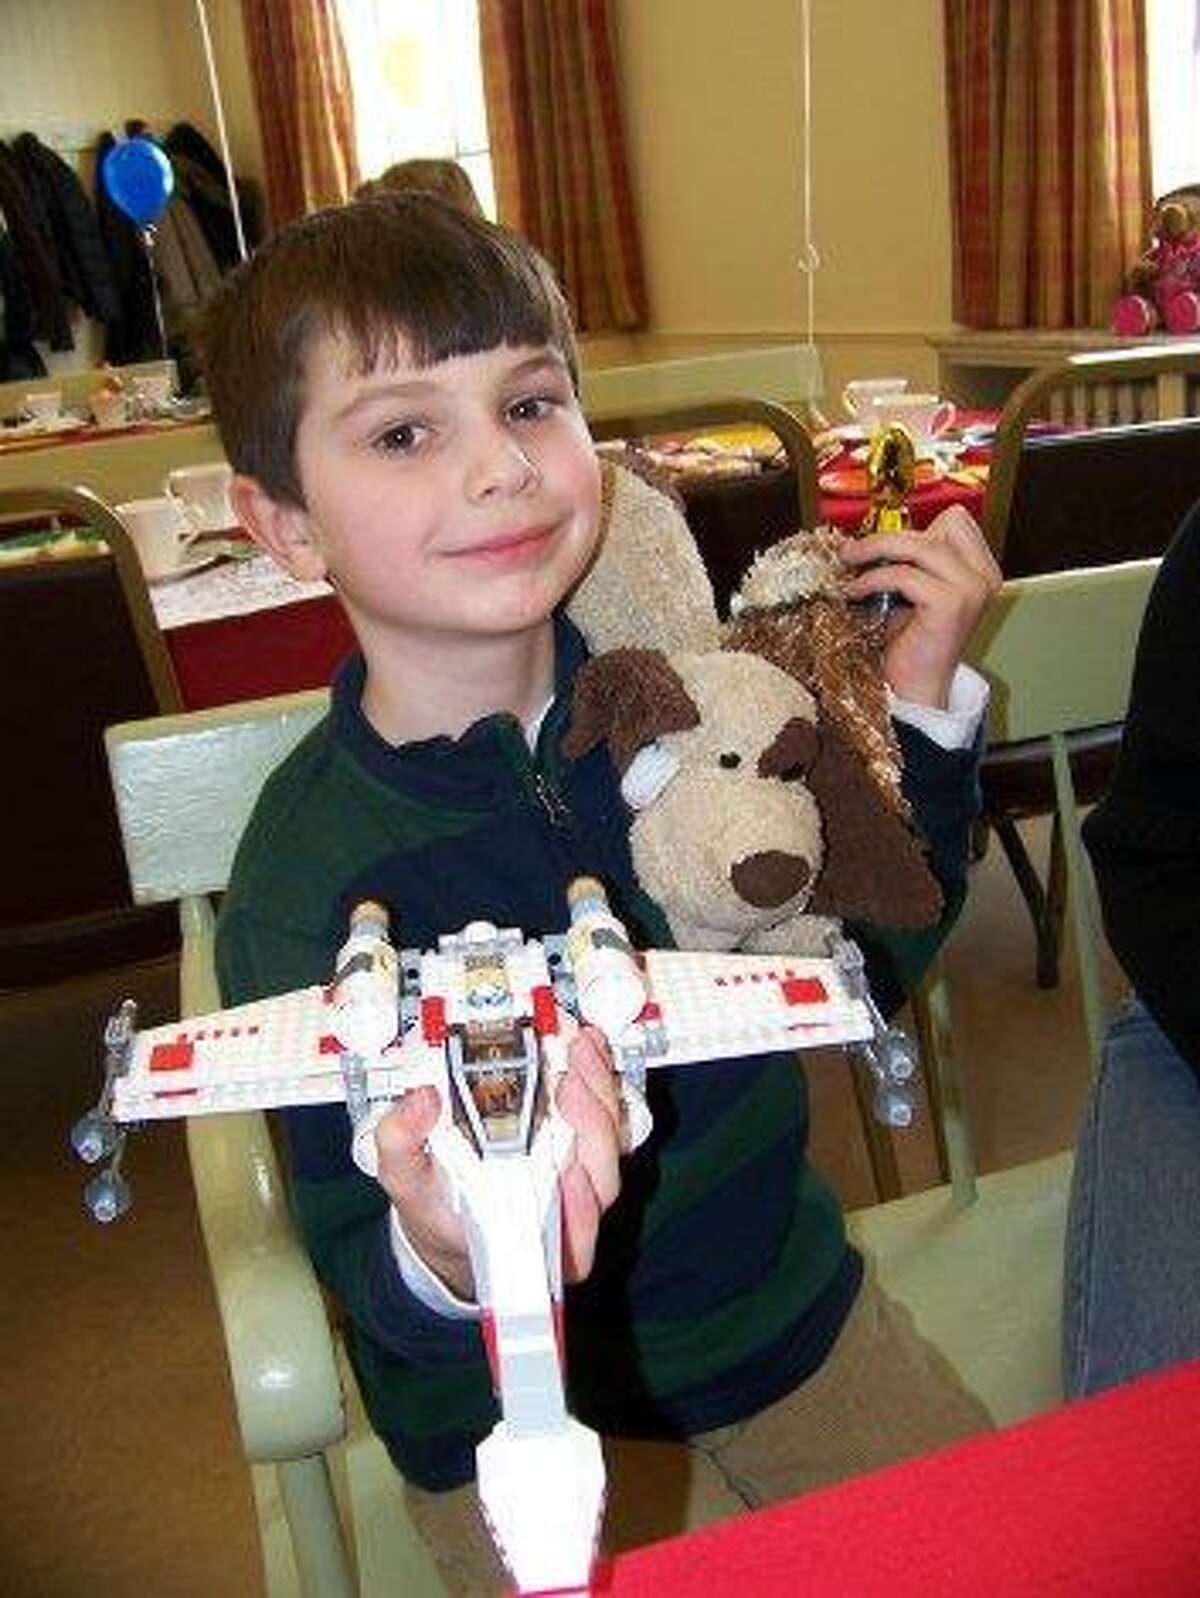 BARBARA THOMAS/Register Citizen Jacob Kuegler, 6-1/2, of Litchfield shows his trophy for winning the LEGO contest, along with his creation: a X-wing fighter from Star Wars.